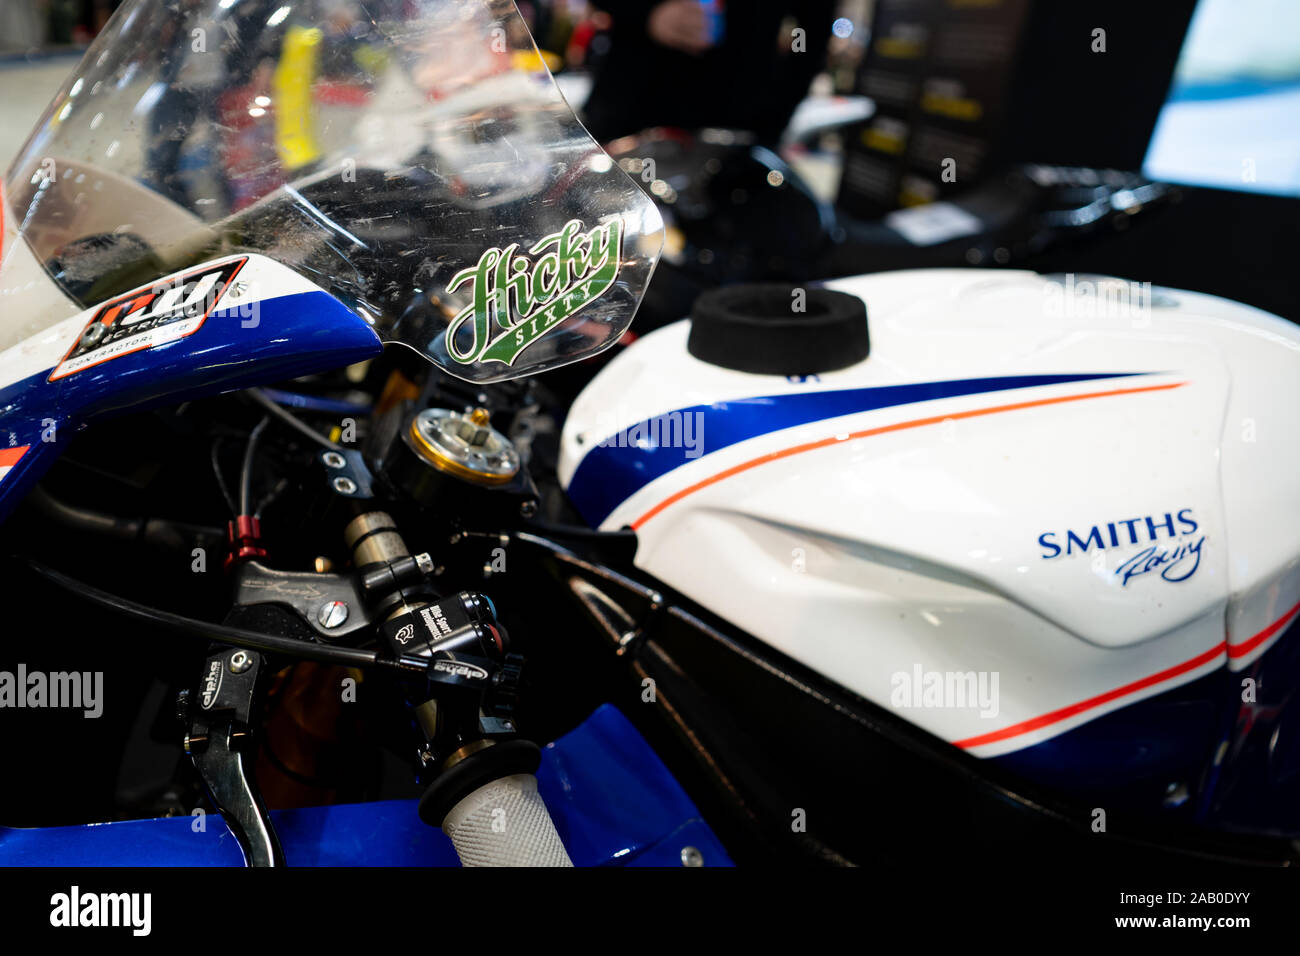 Smiths BMW S1000RR ridden by Peter Hickman for the Smiths Racing BMW team in Bennetts British Superbike Championship Stock Photo